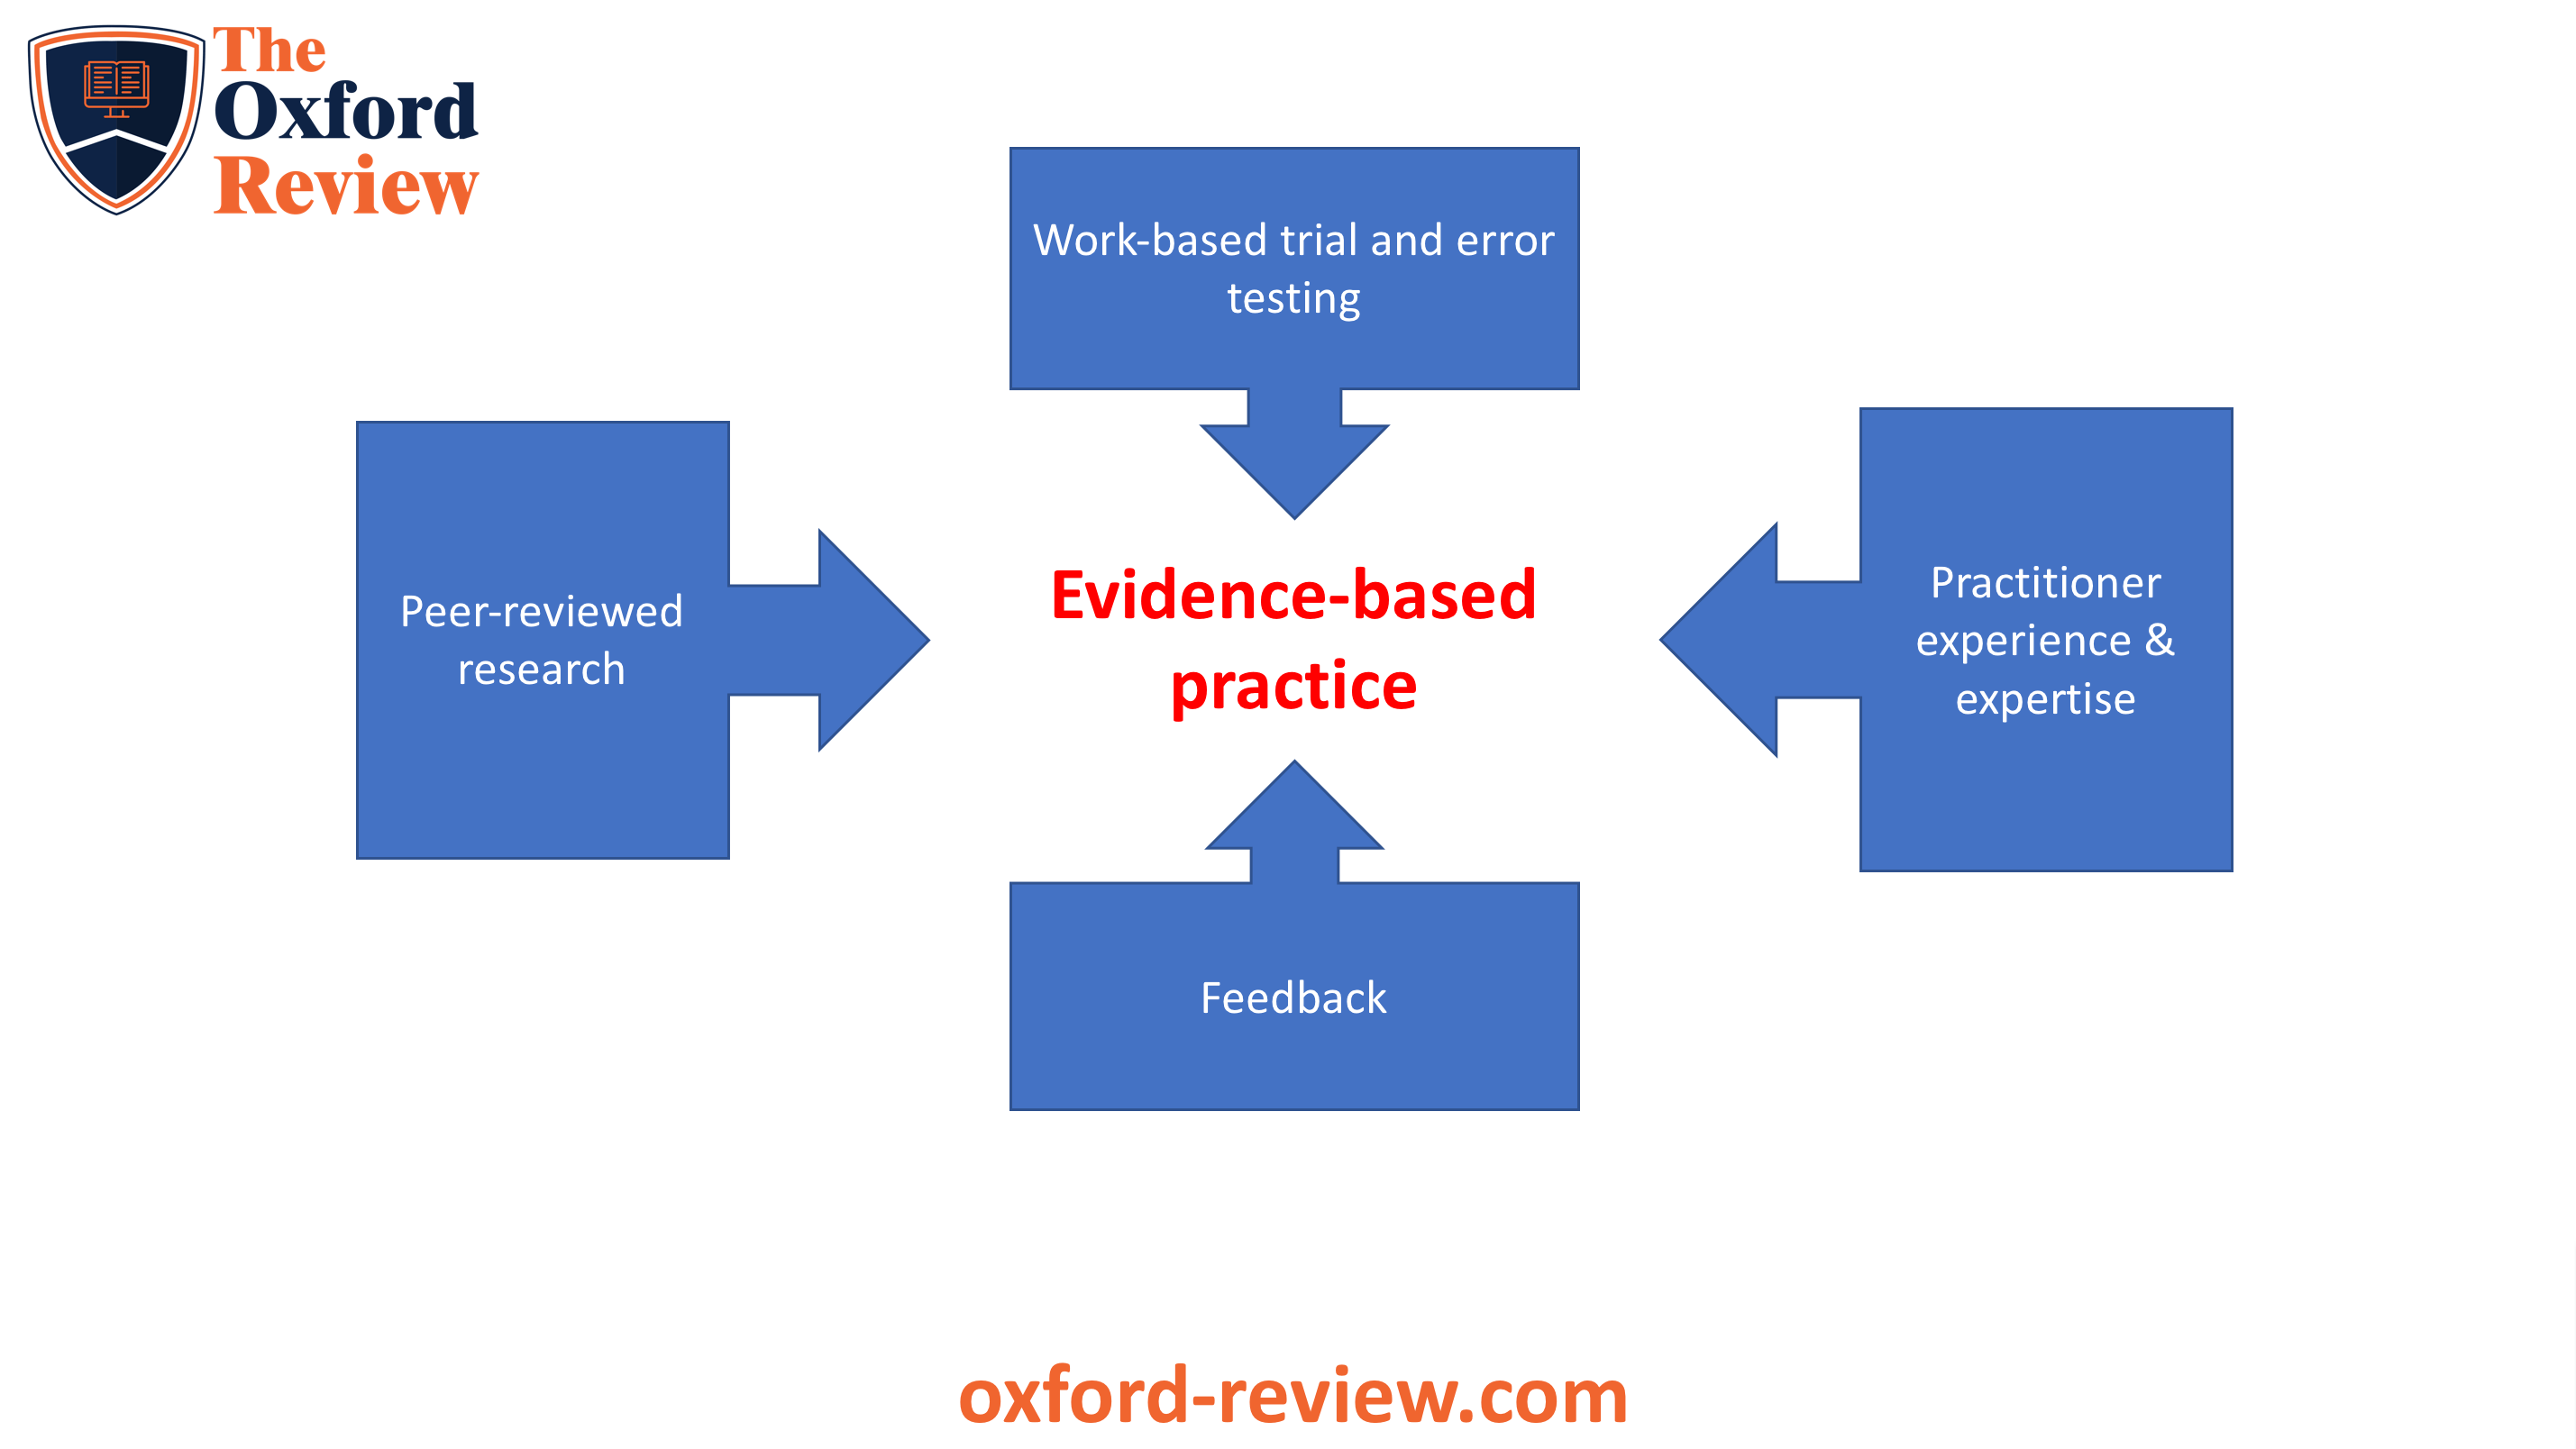 Evidence-based practice sources